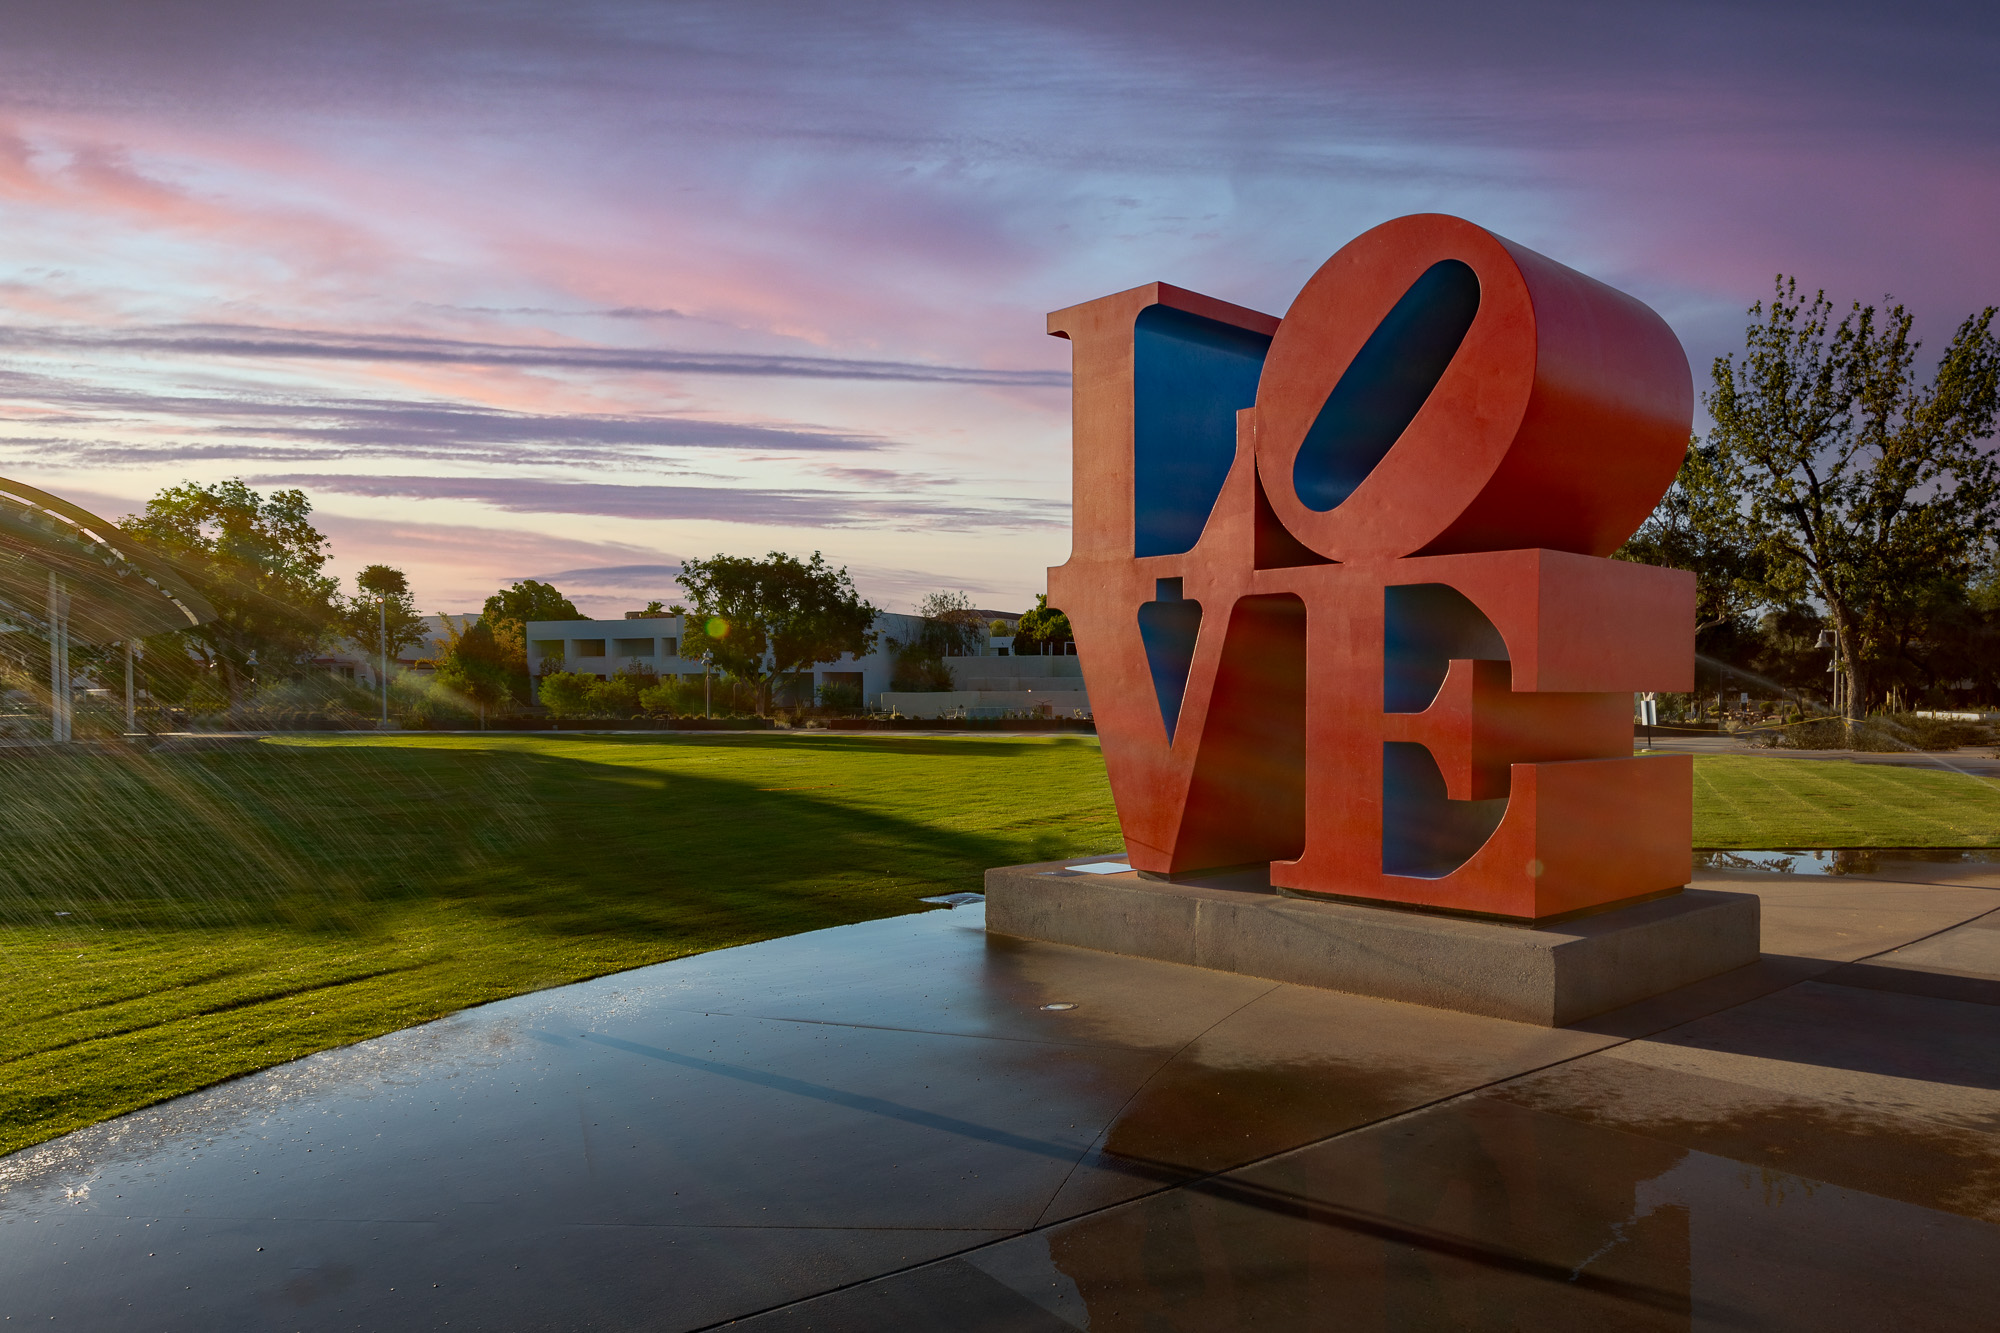 A vibrant red and blue statue of love stands proudly in a park.